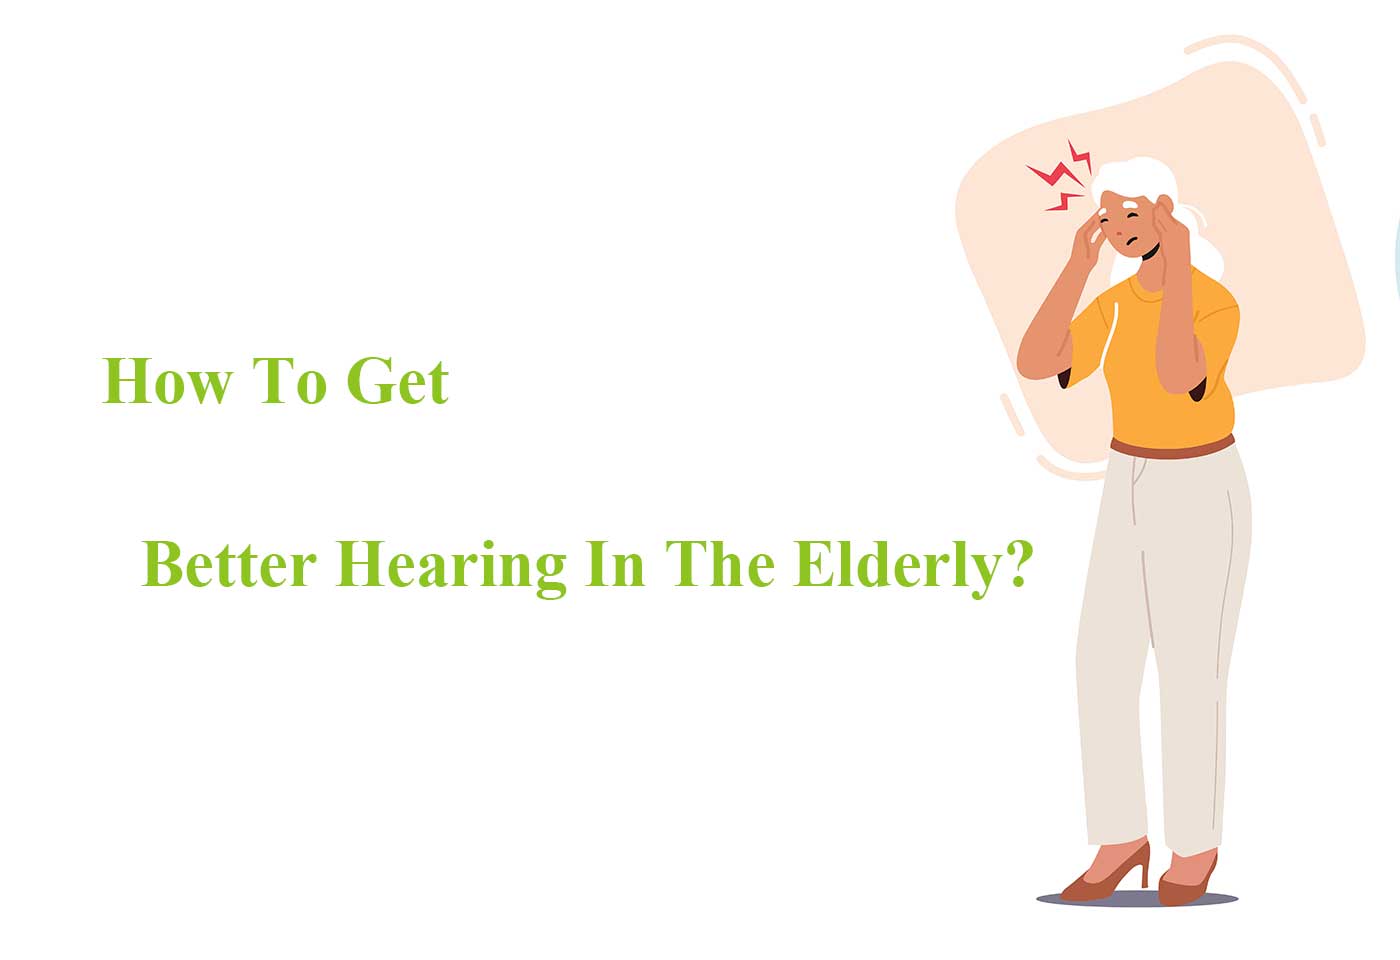 How To Get Better Hearing In The Elderly?